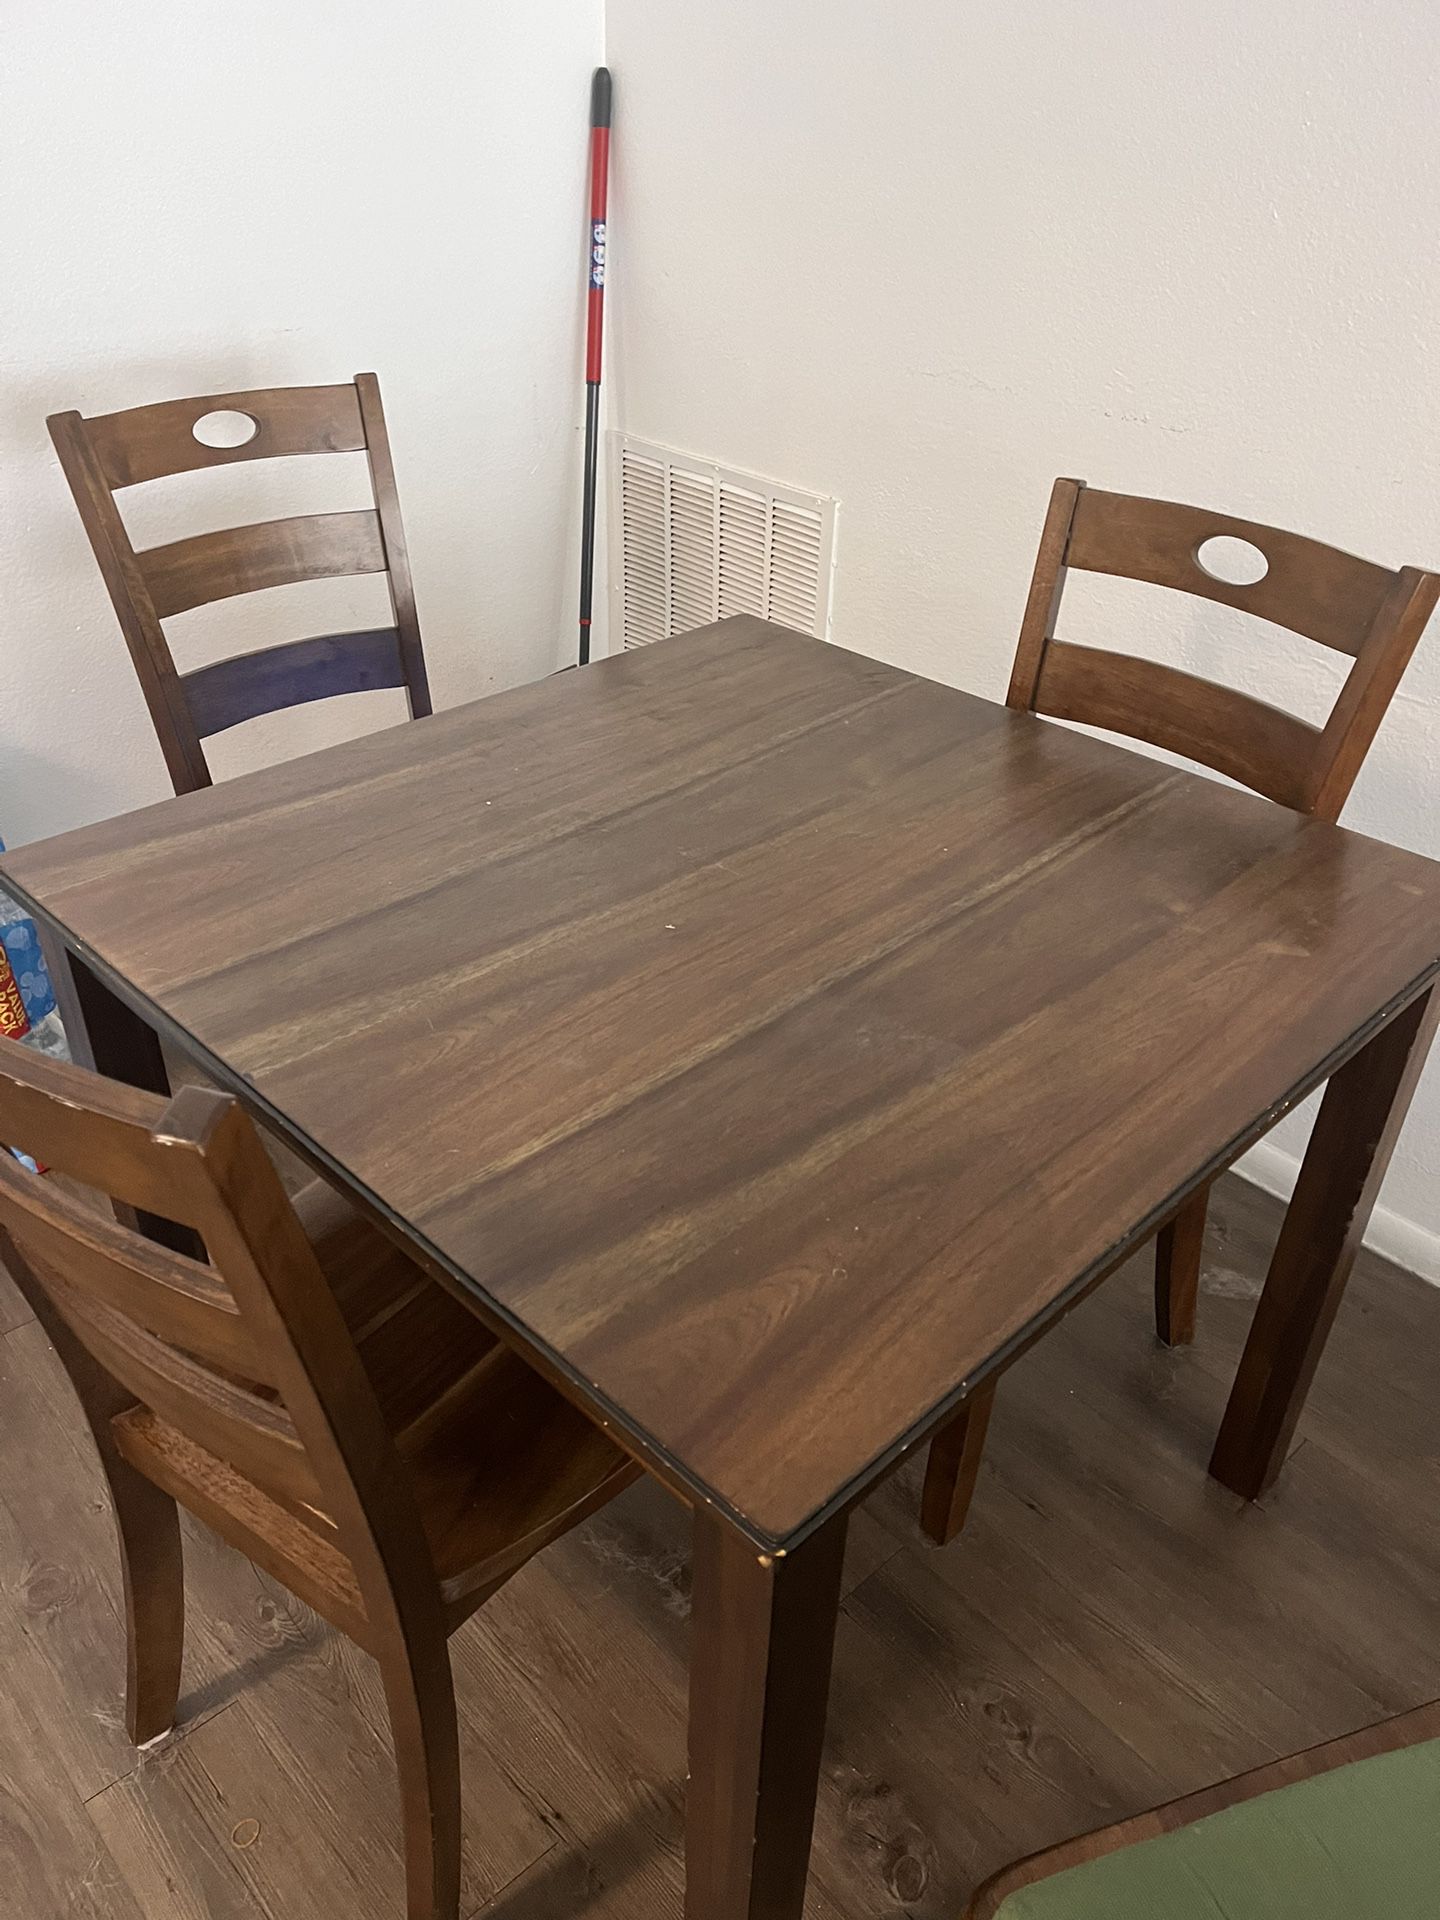 Dinette Table And Four (4) Chairs 